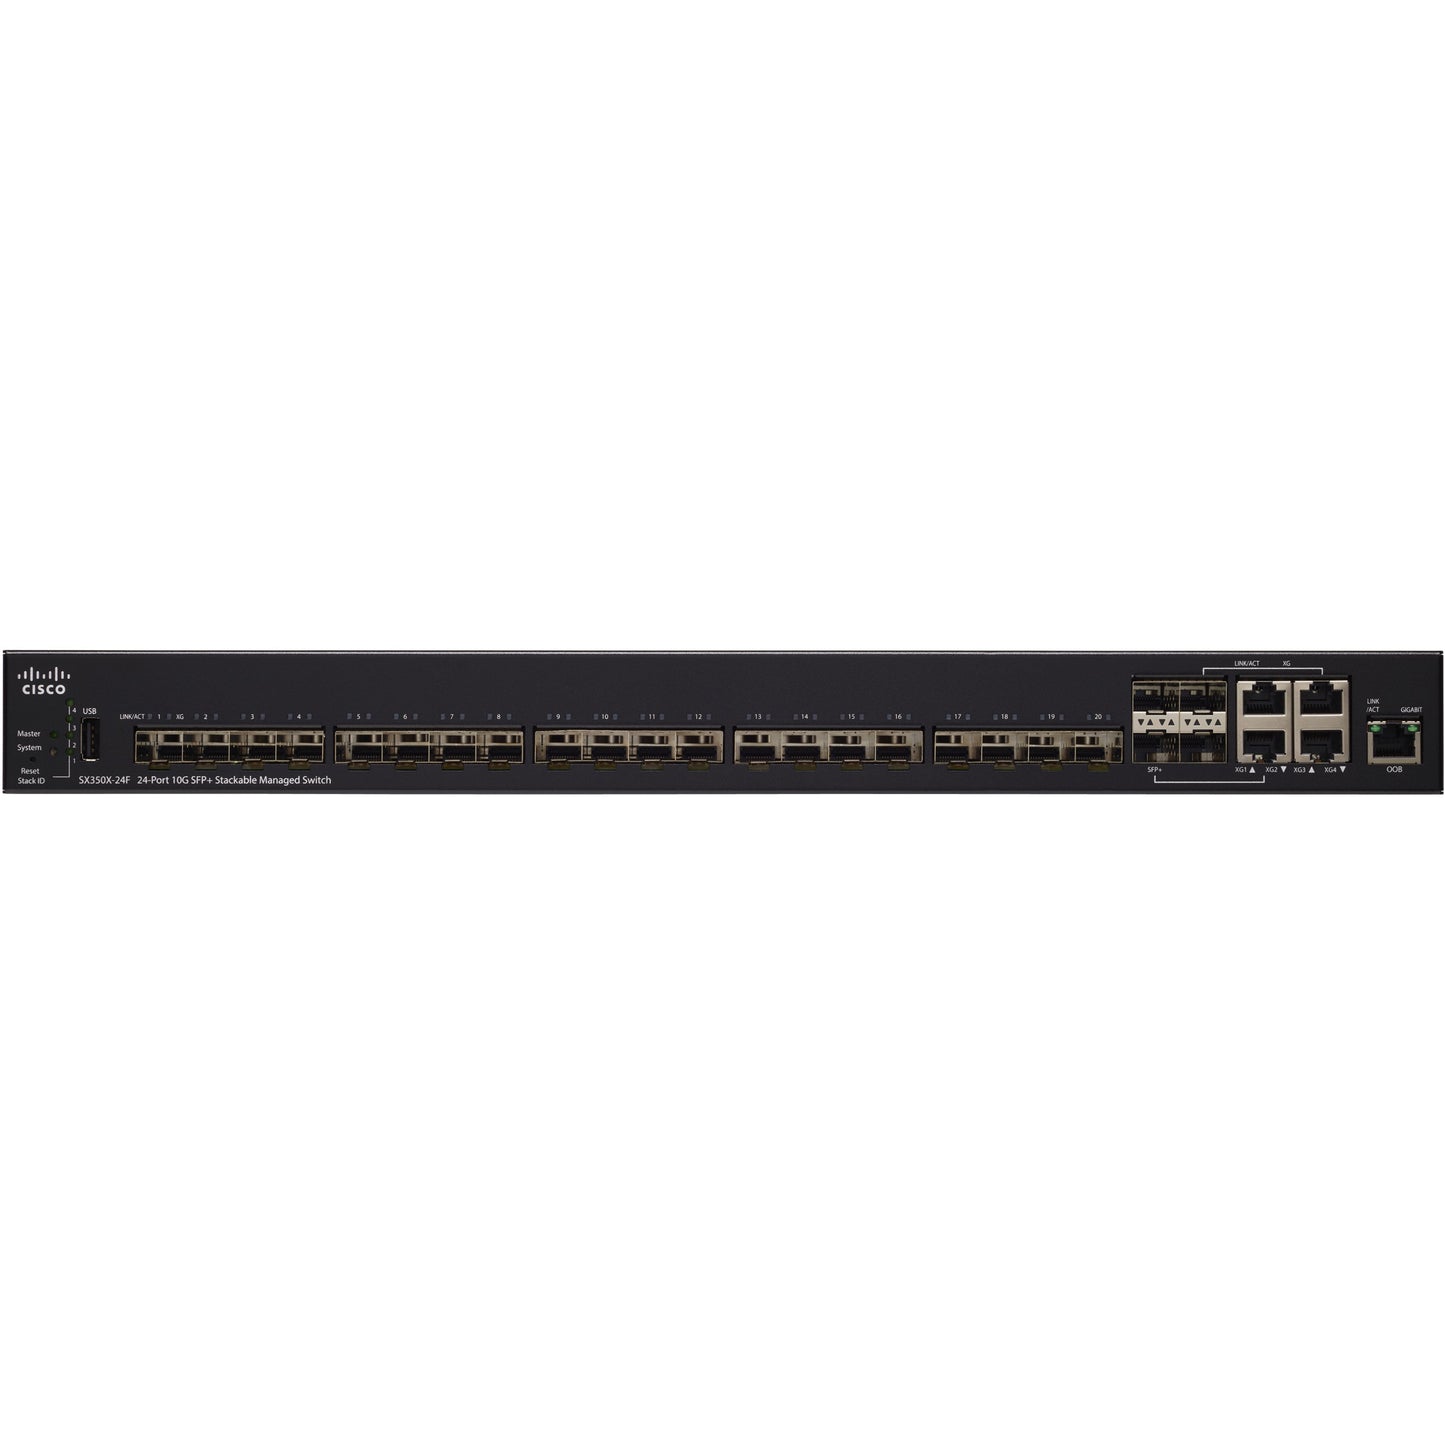 Cisco SX350X-24F 24-Port 10G SFP+ Stackable Managed Switch